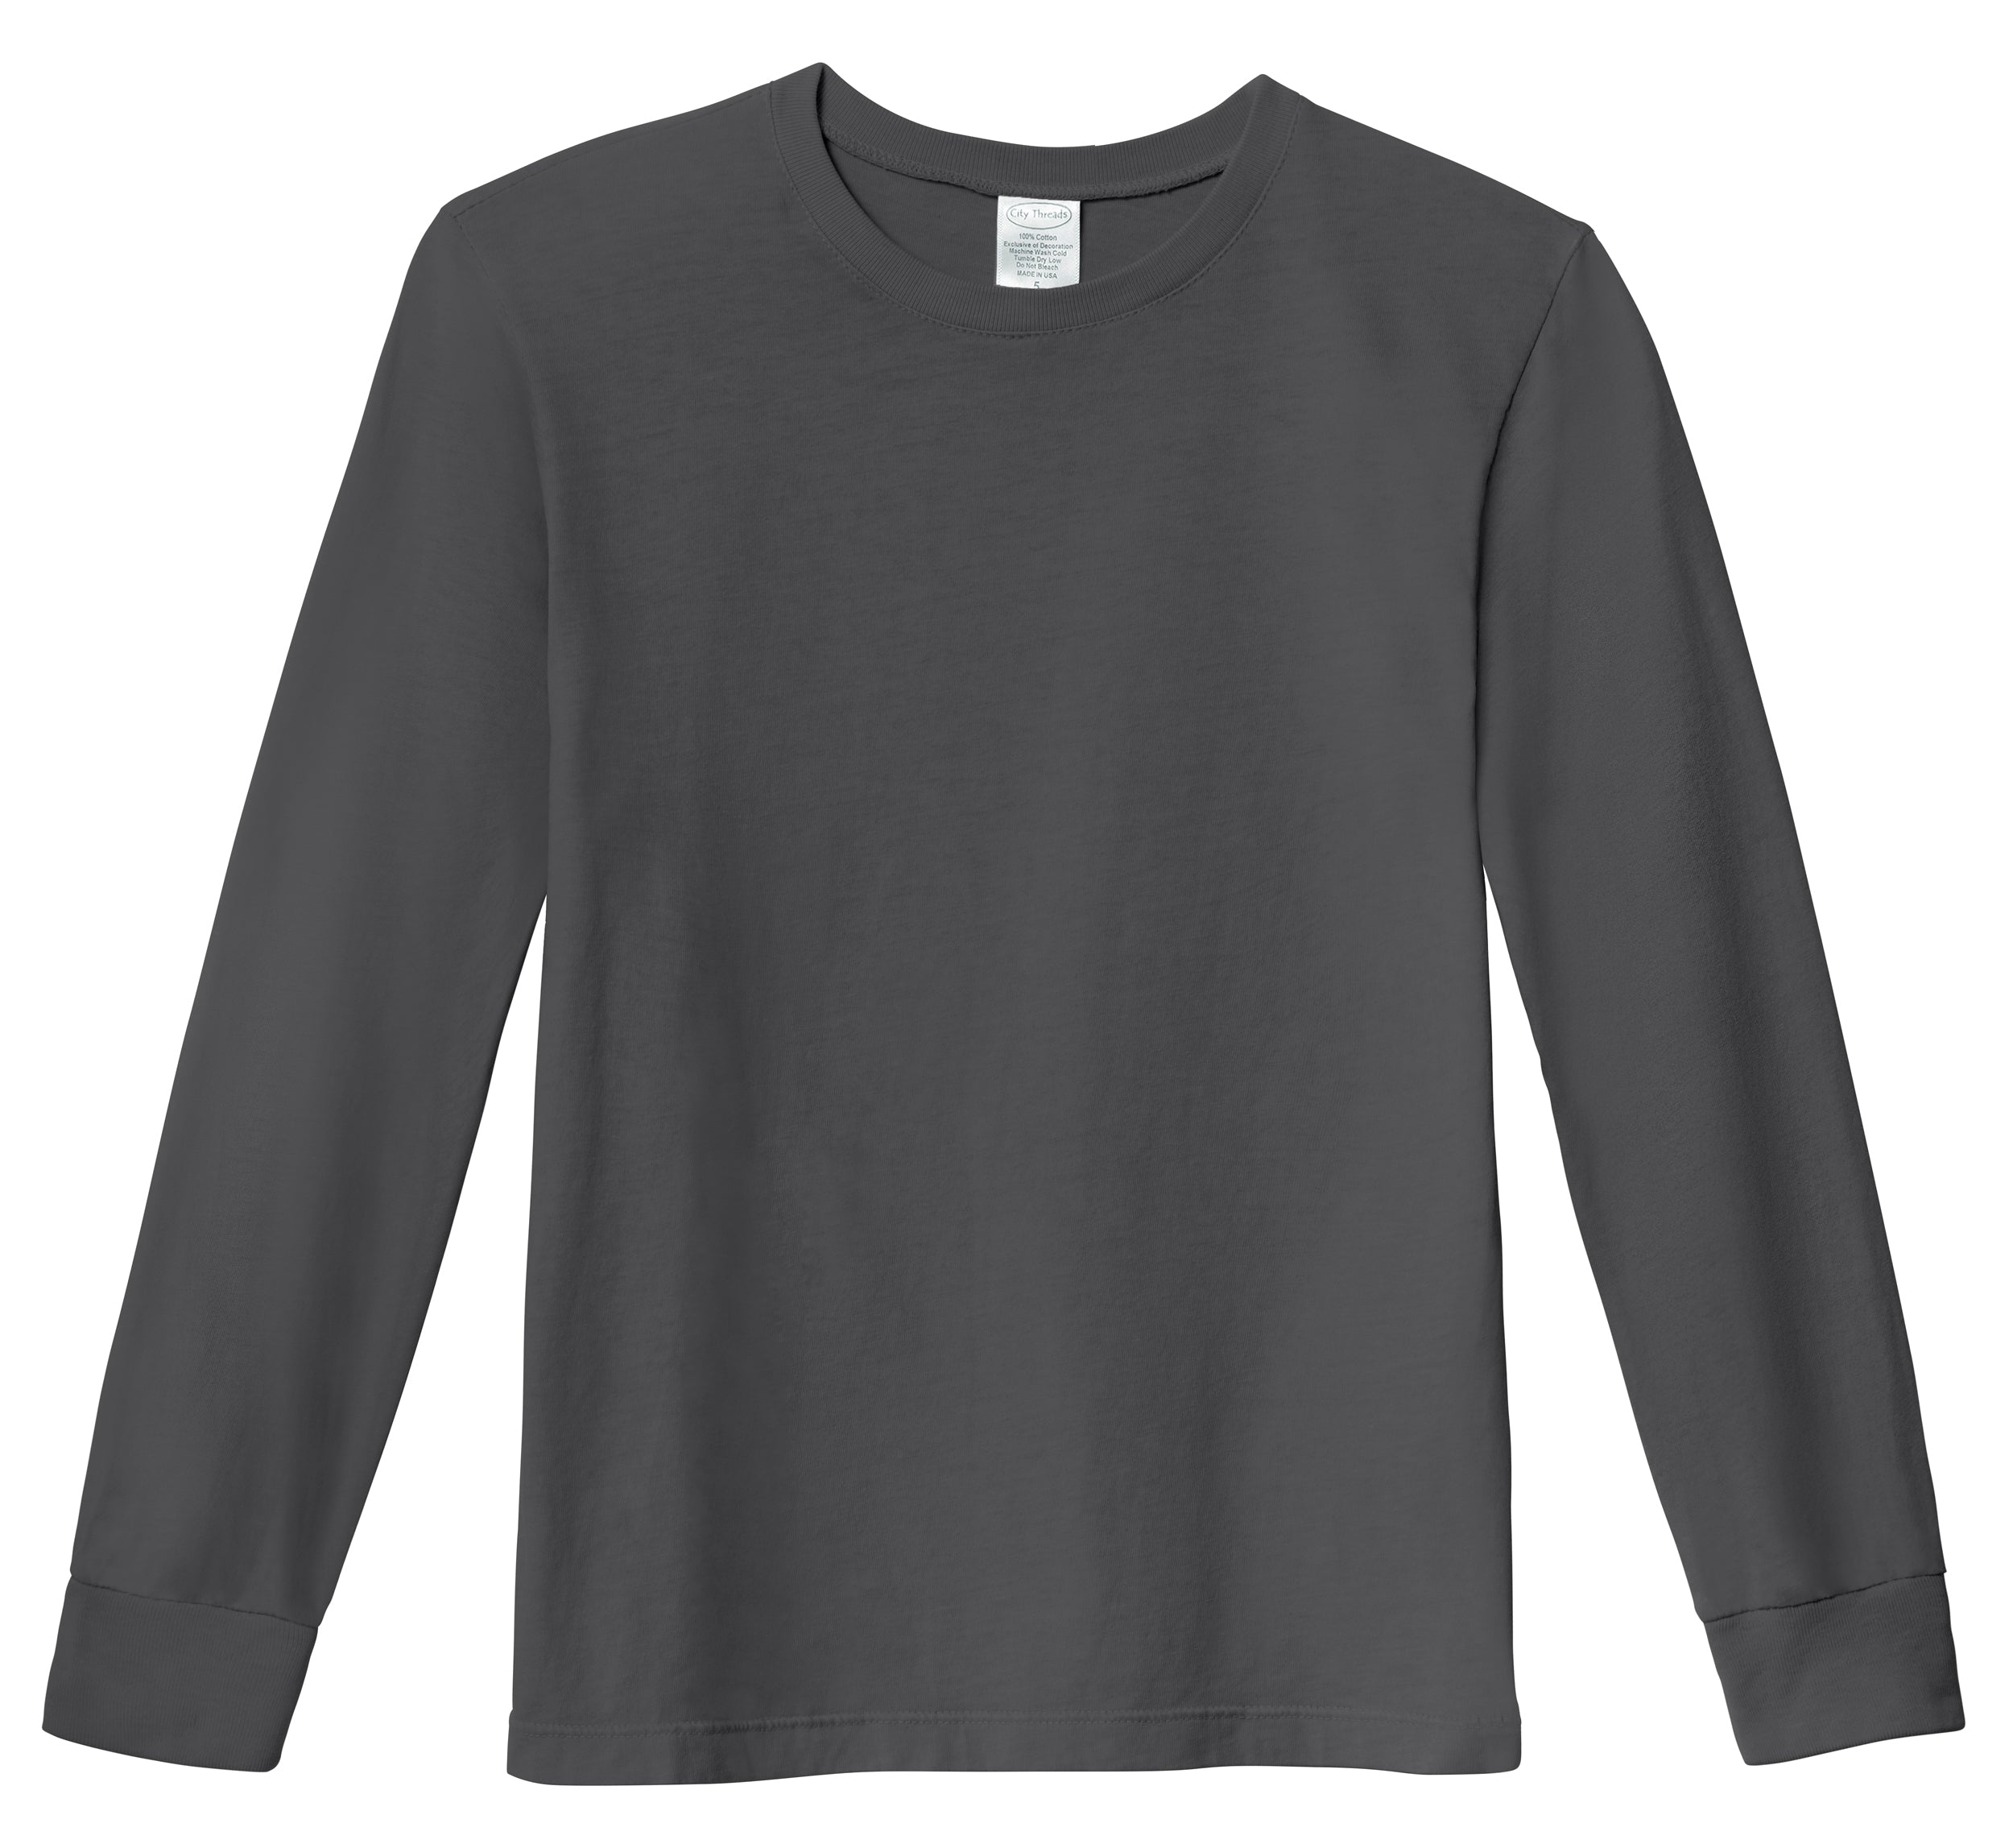 Black and Grey Panel Cotton Modal Long Sleeve T-shirt MTS 723 – The Archive